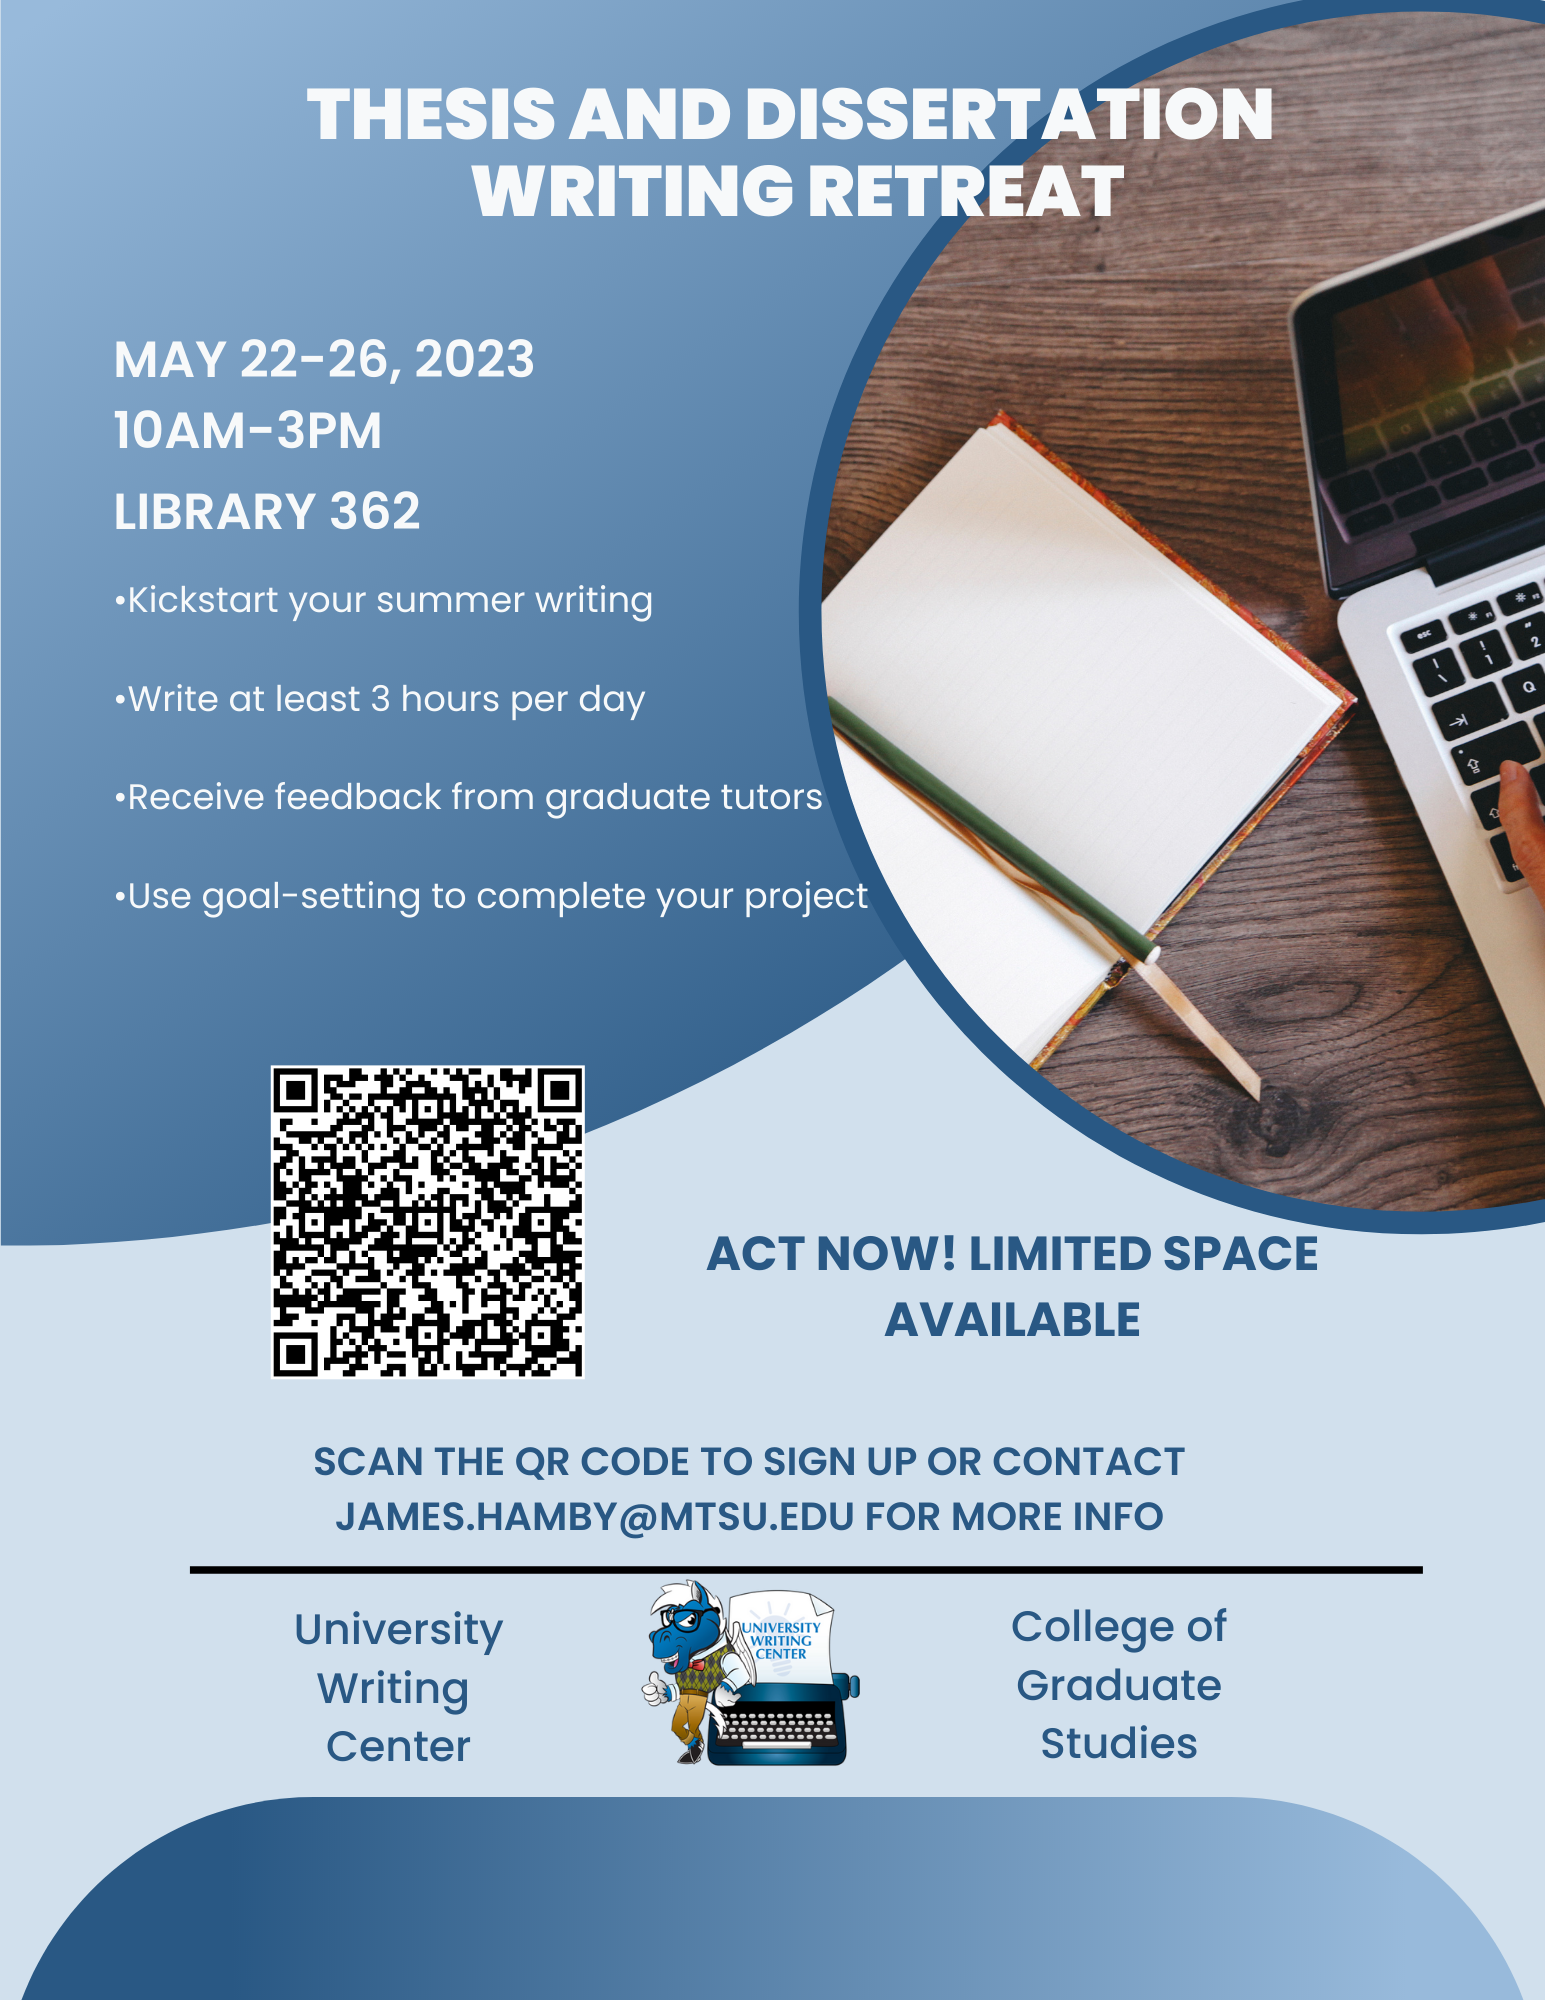 Thesis and dissertation writing retreat flyer